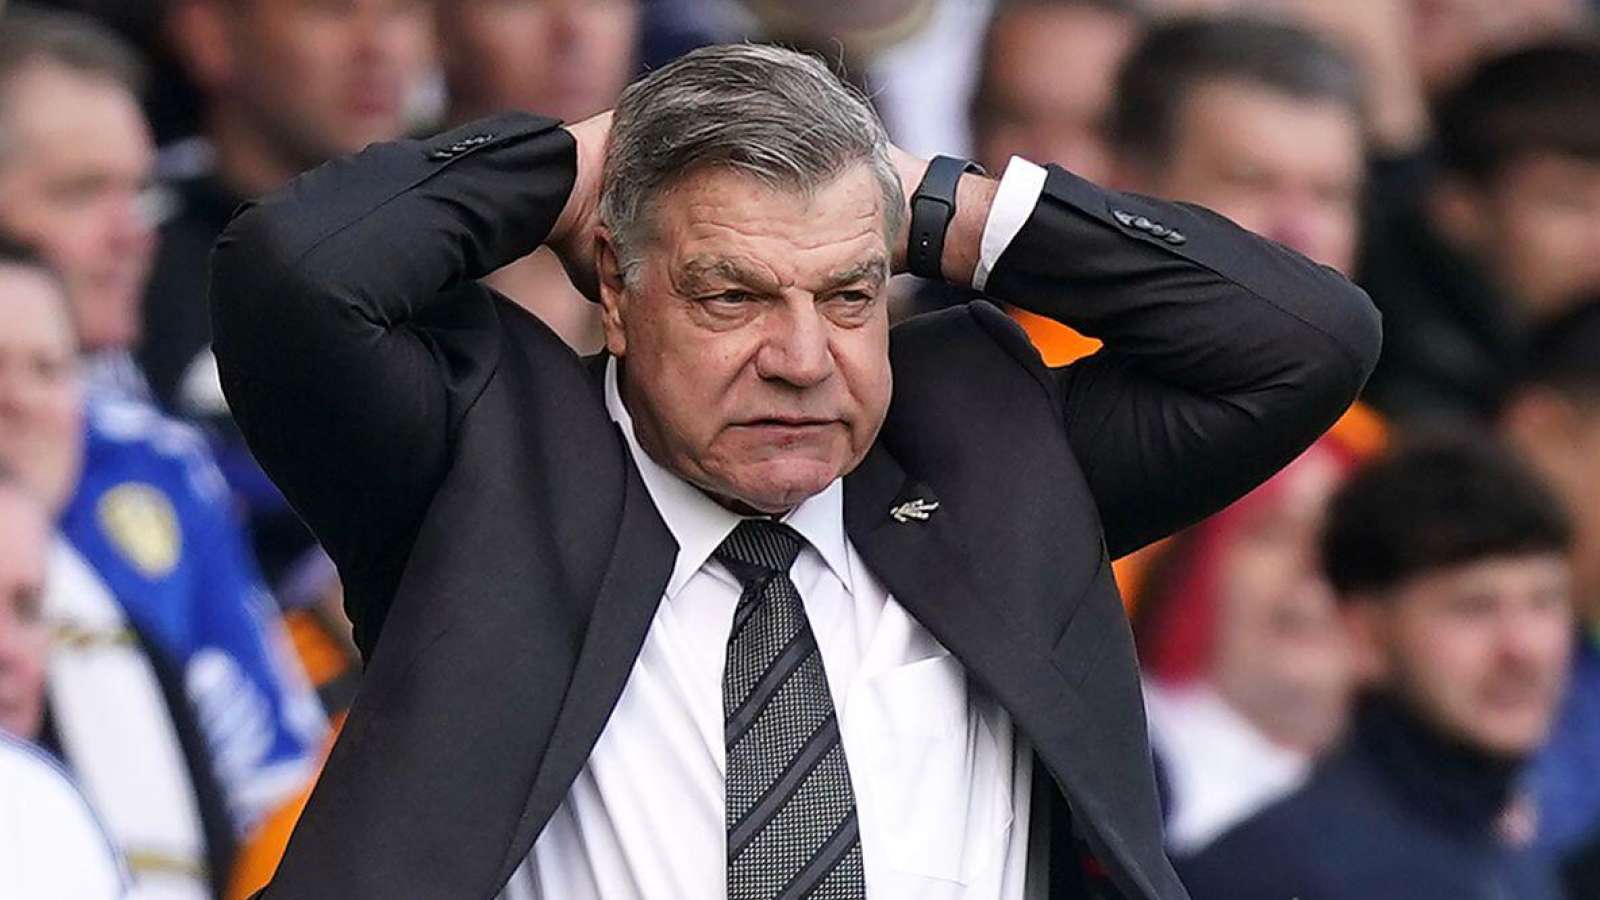 Leeds had spoken about ‘fairytale’ managerial appointment before settling on Sam Allardyce CaughtOffside